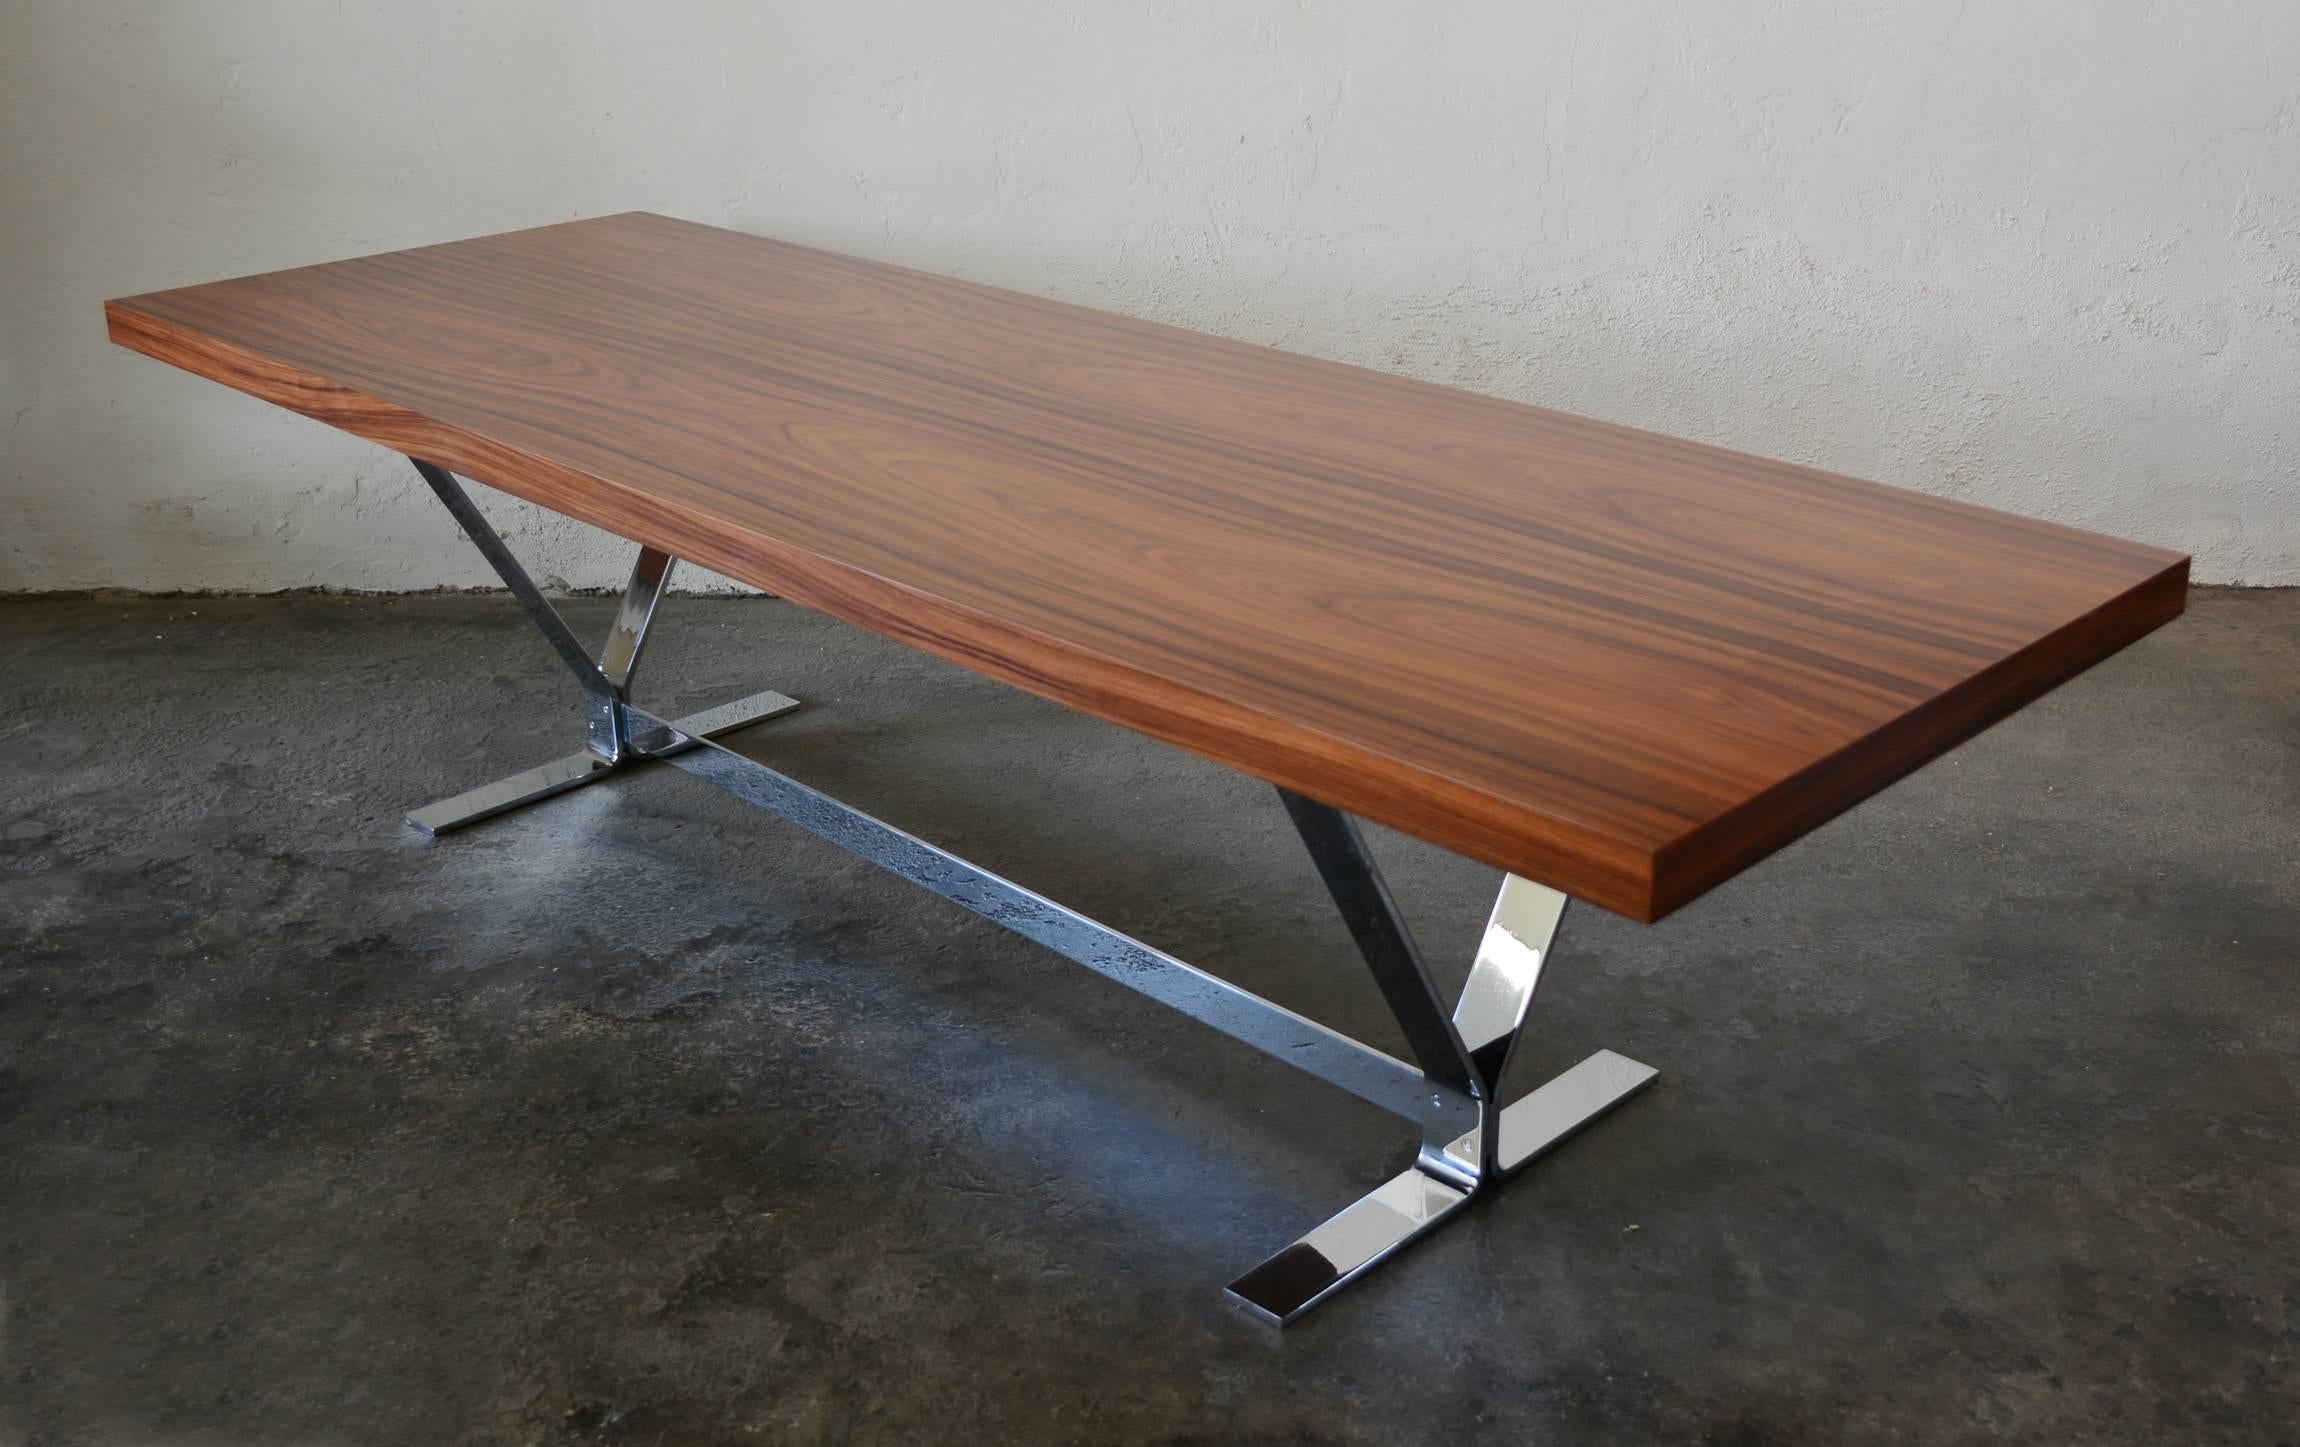 The richly grained rosewood top of this coffee table rest on an architectural chrome flat steel base. Contact us for cheaper shipping rates for California delivery.